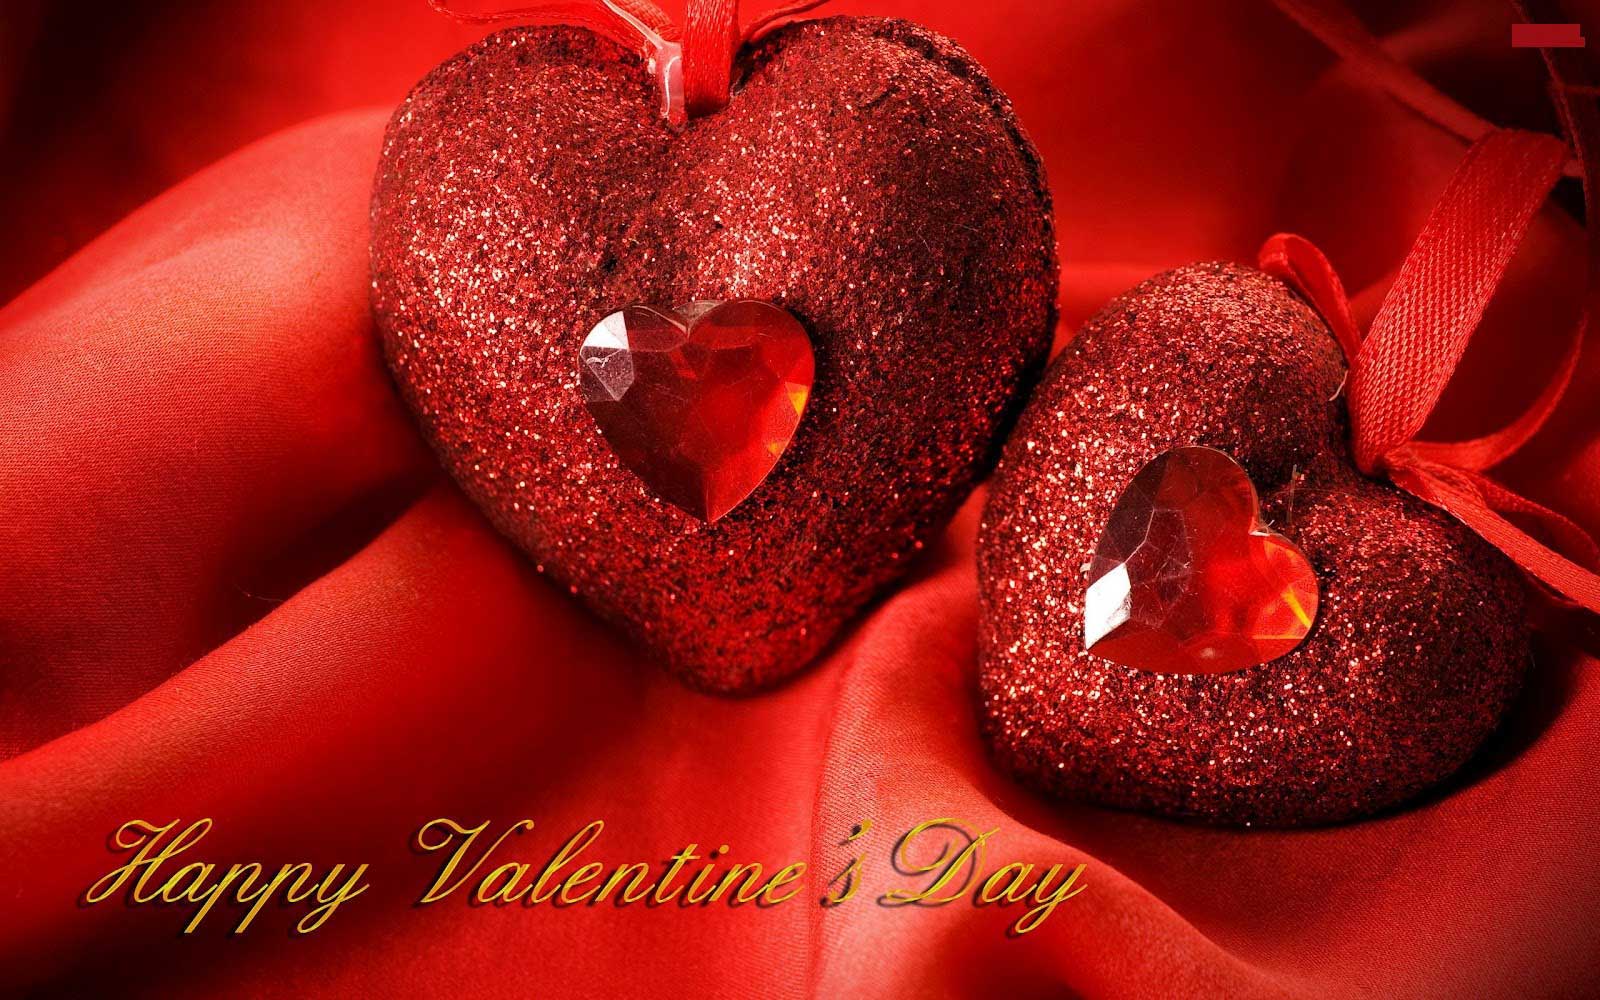 Valentines Day Images 2016 Wallpapers - Valentines Day Images Hd - HD Wallpaper 